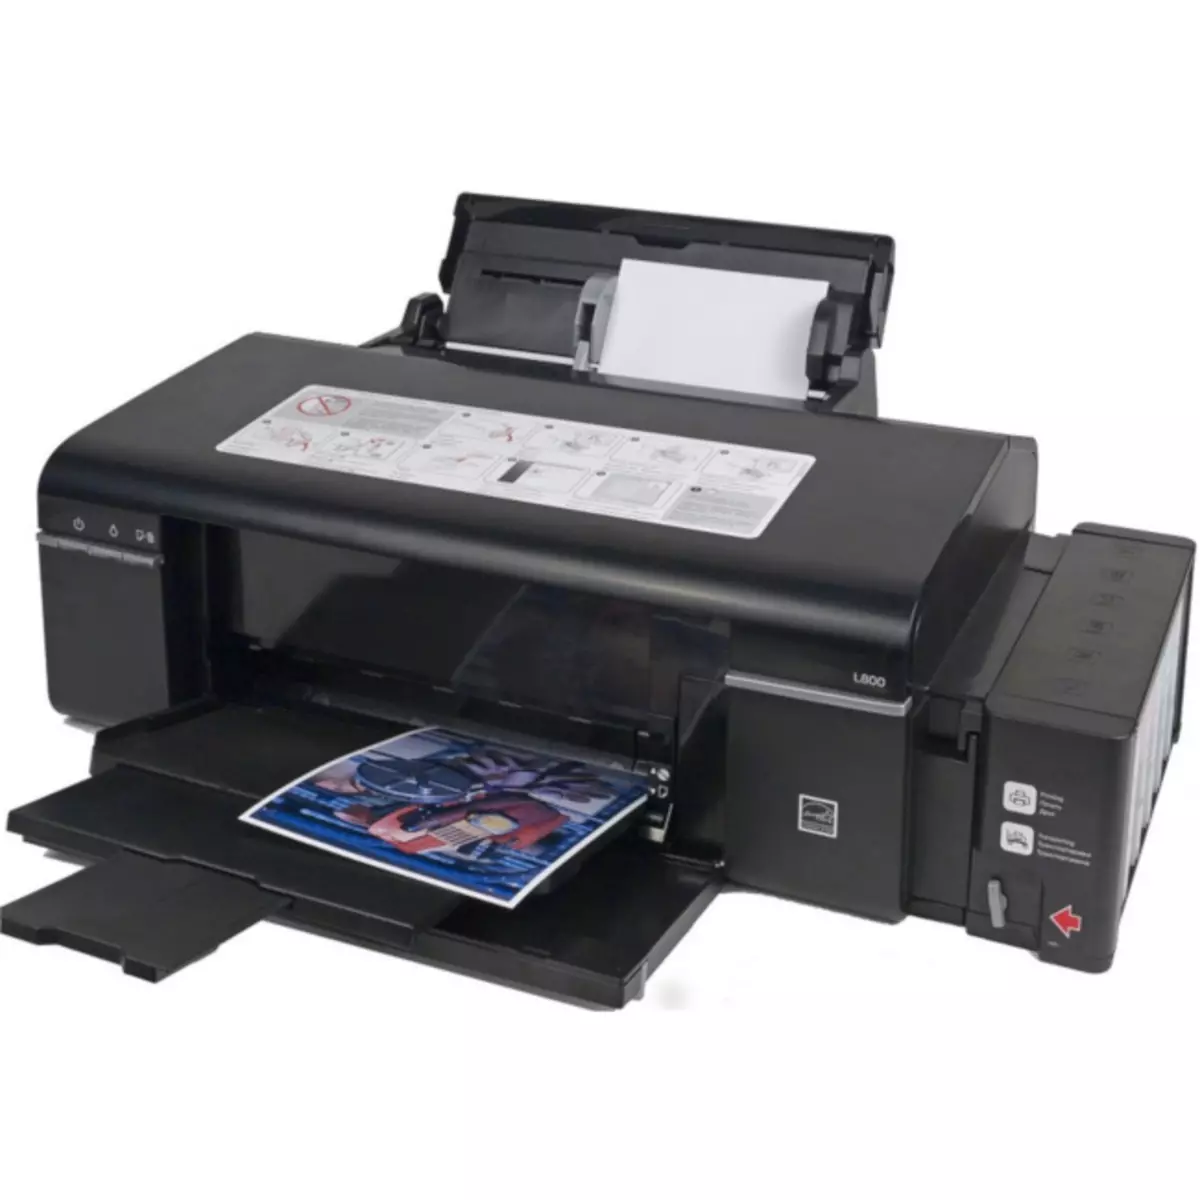 Download Drivers for Epson L800